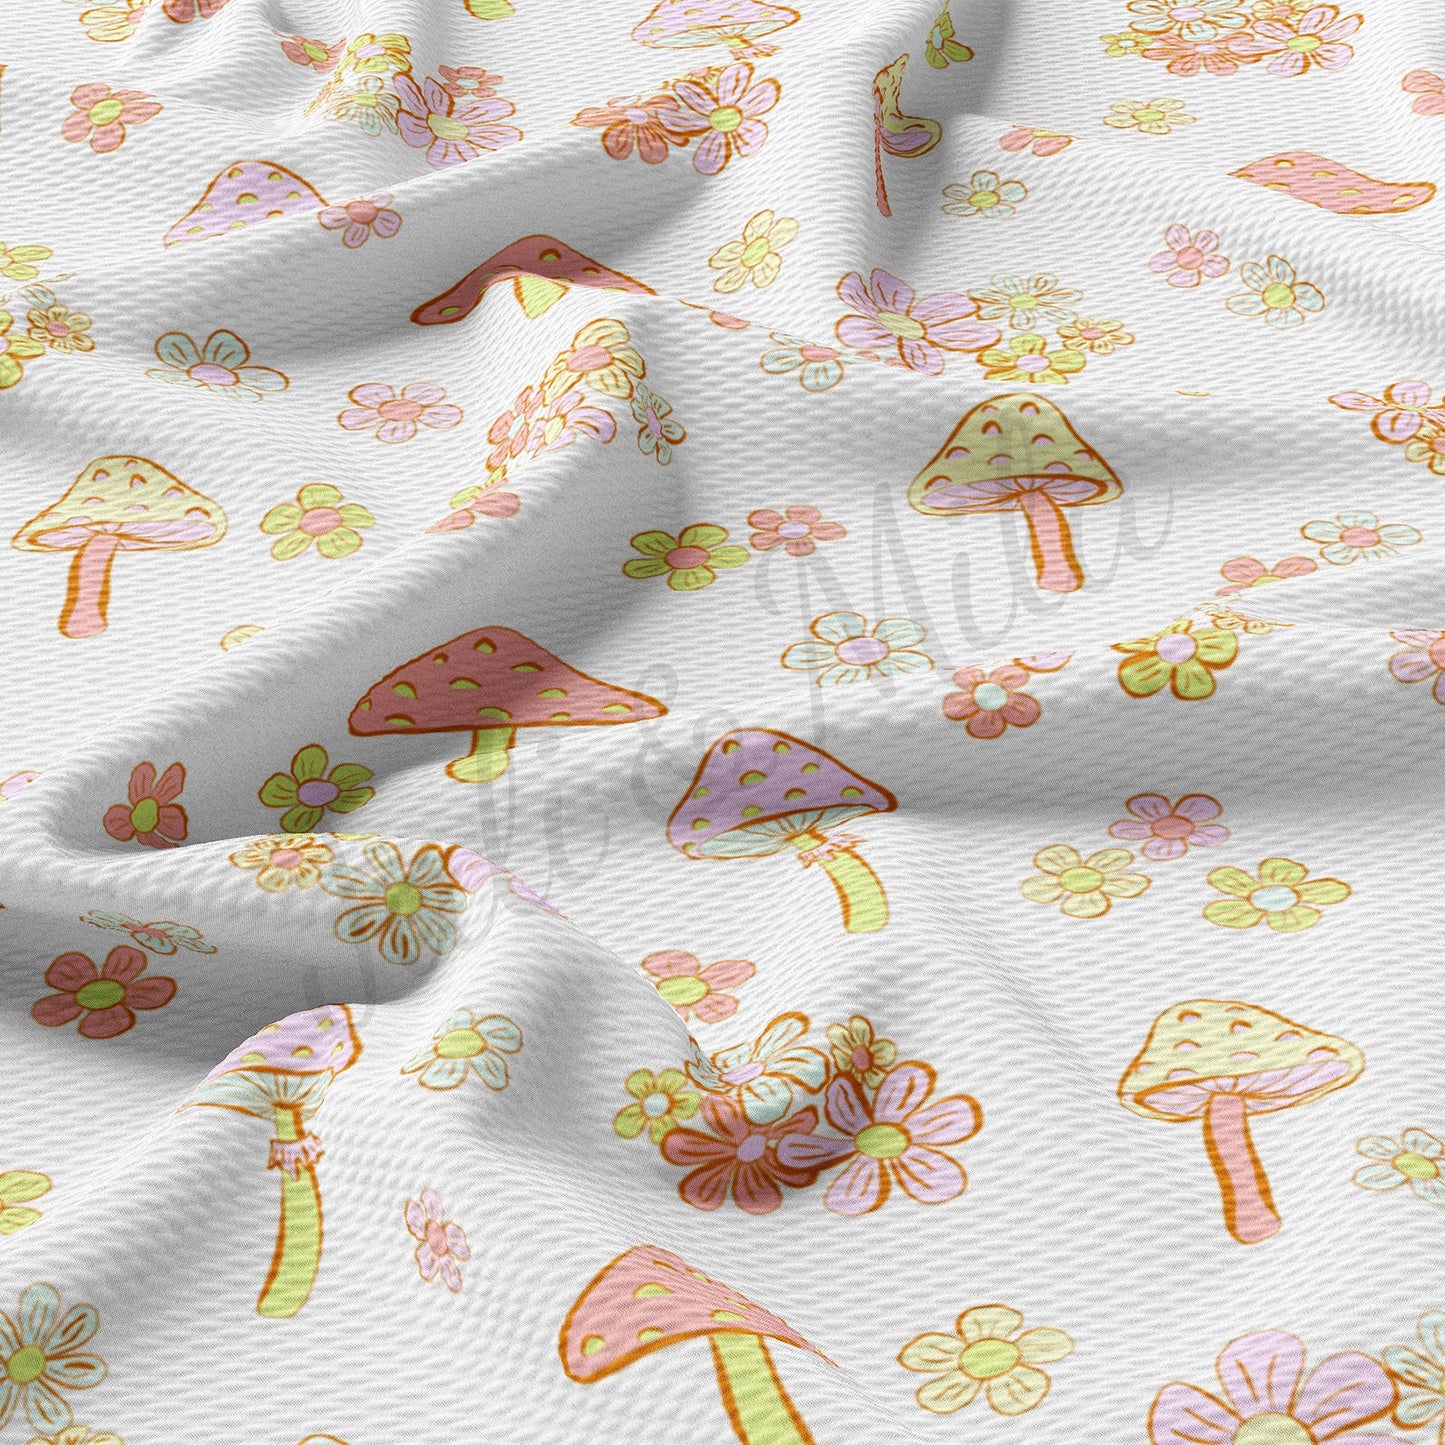 Mushrooms  Bullet Textured Fabric by the yard AA1497